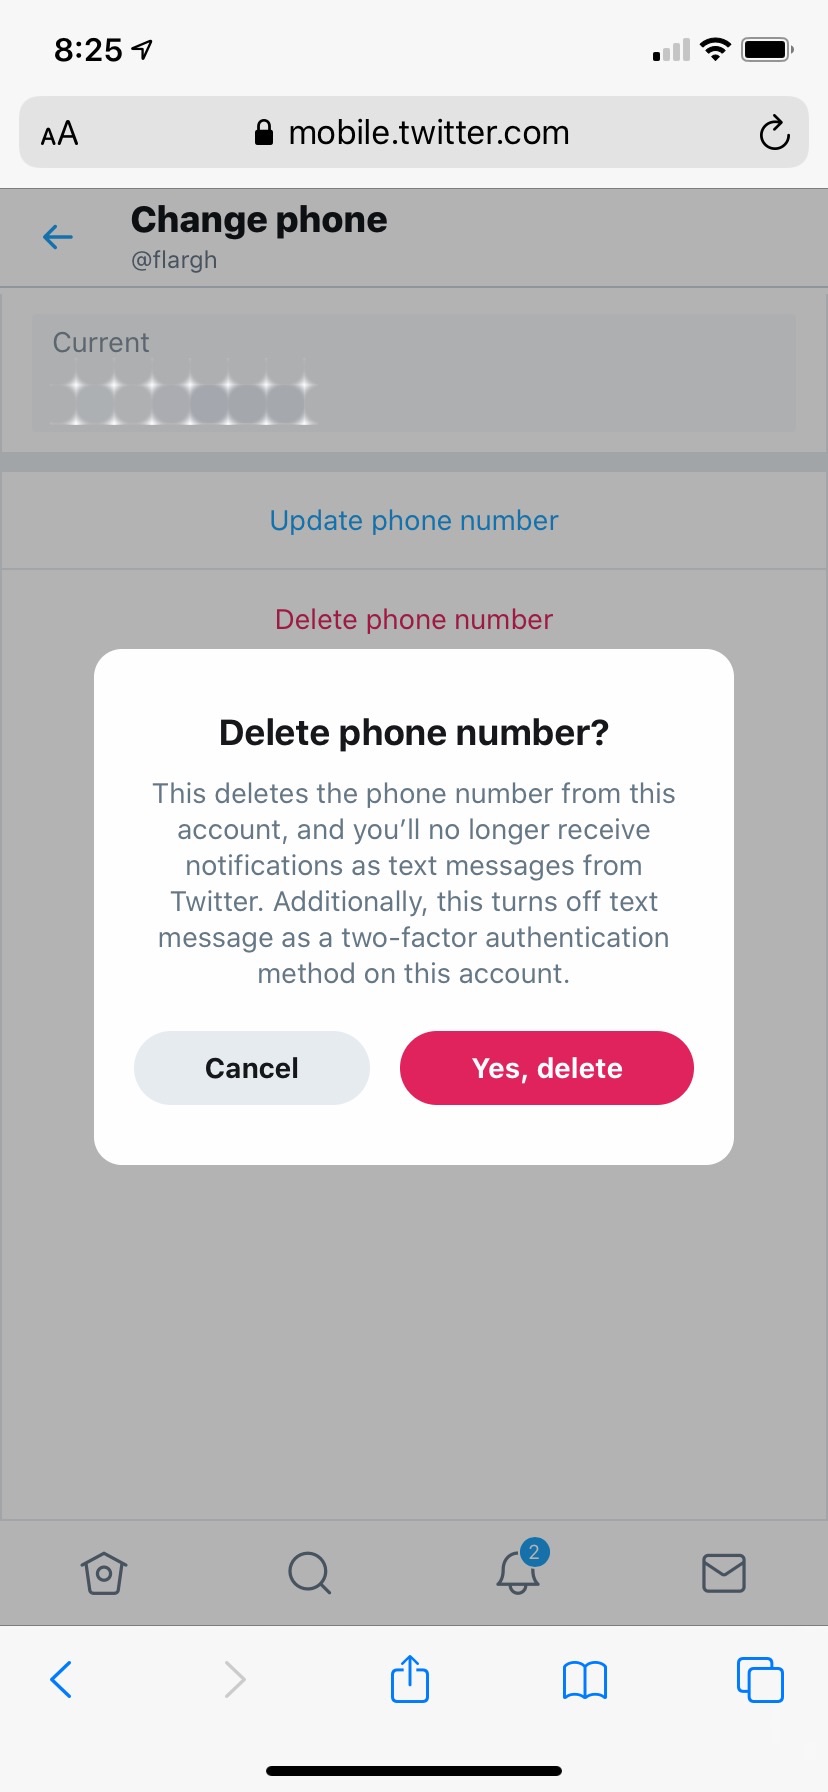 Twitter 2FA delete phone number